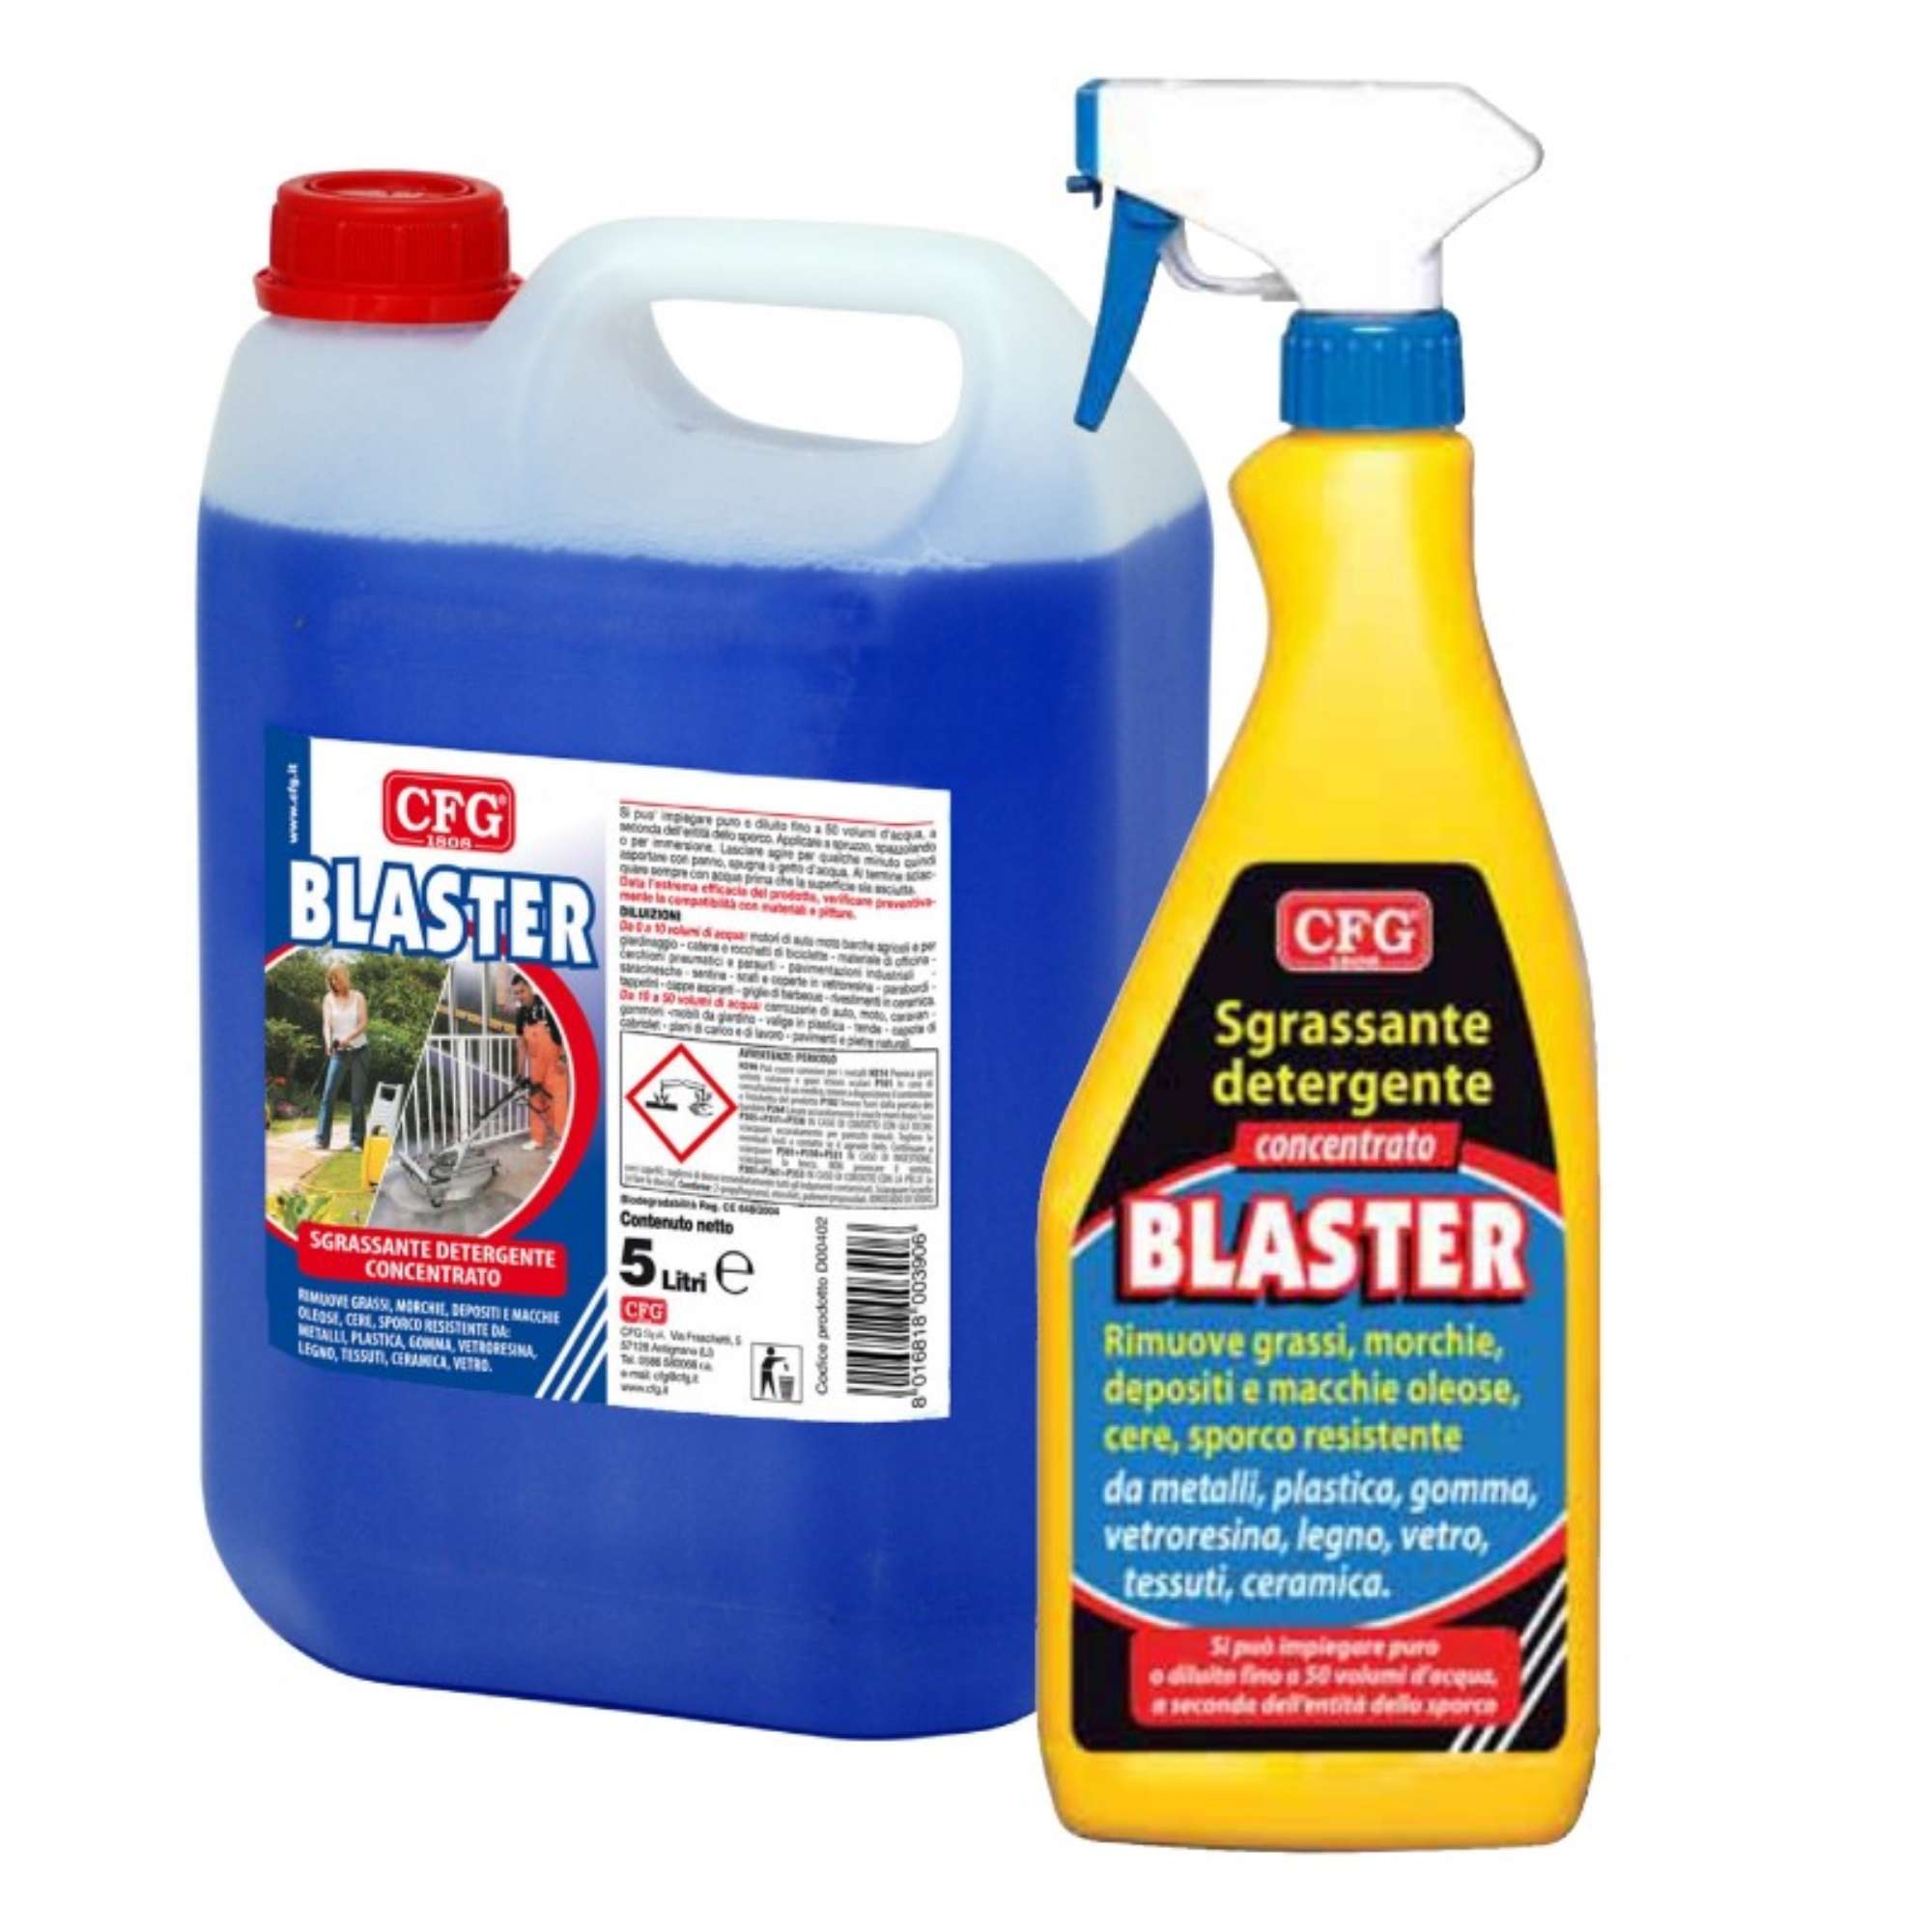 Blaster concentrated degreaser cleaner - CFG